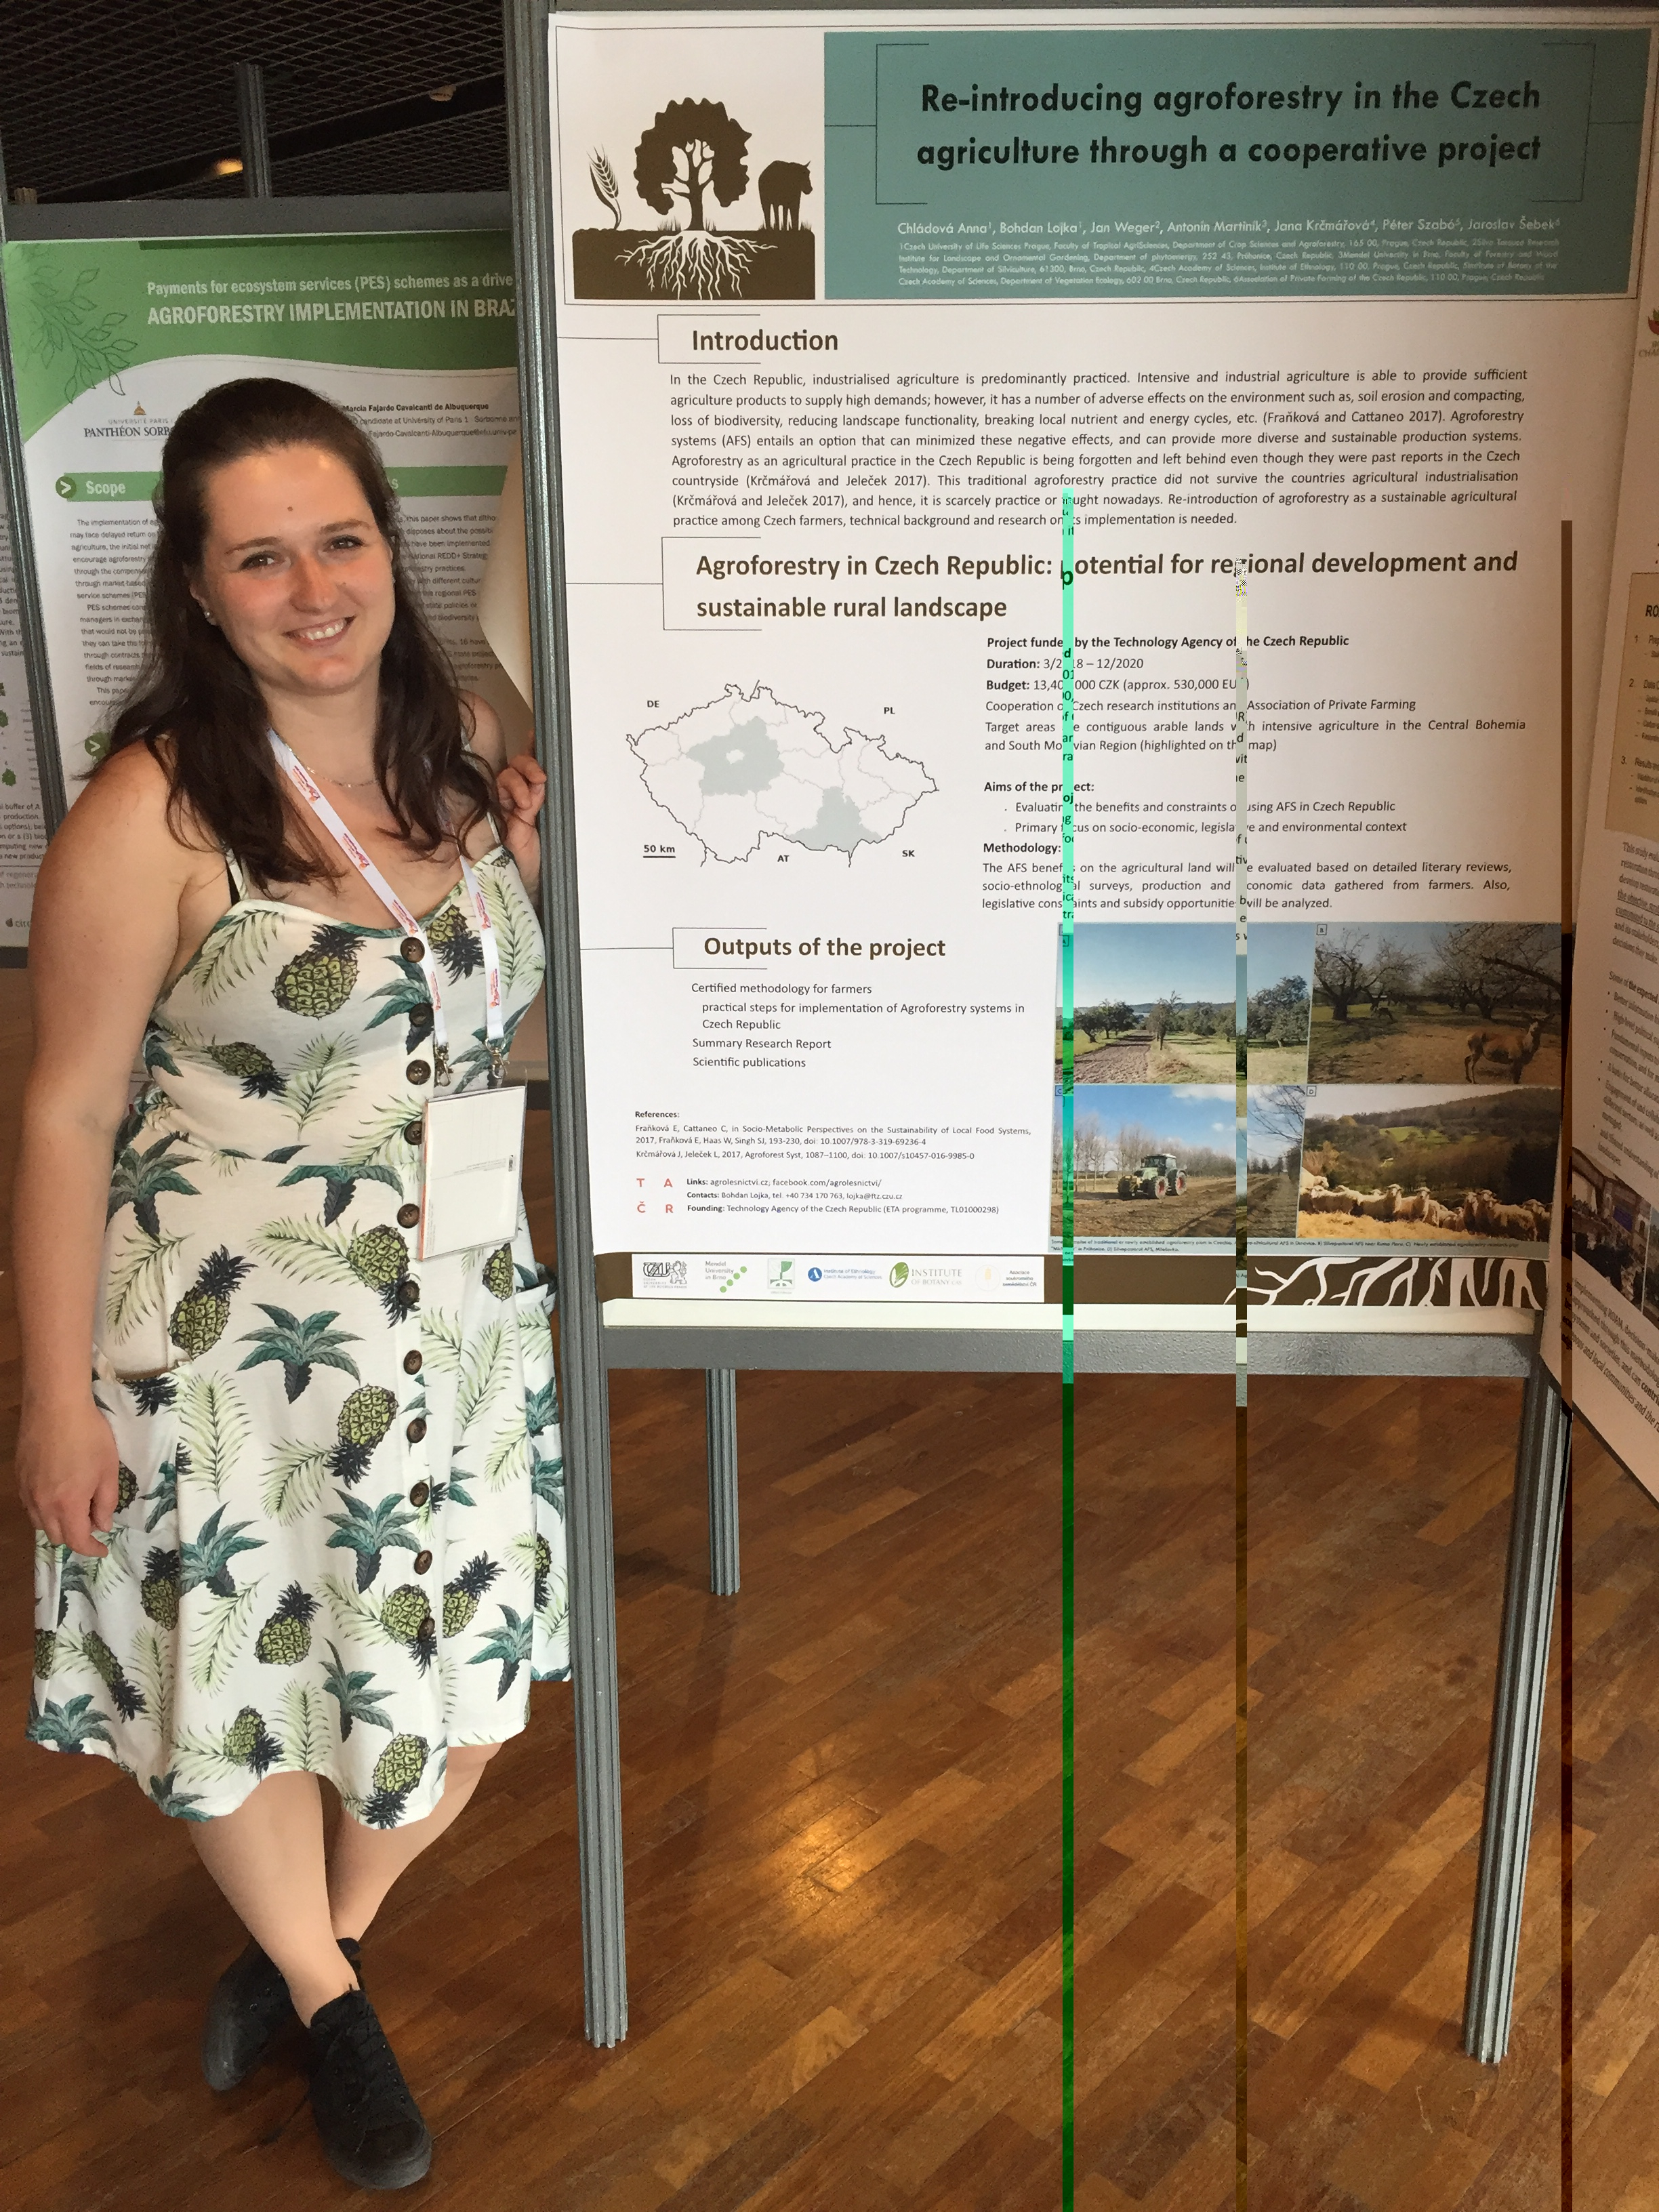 Anna Chládová s posterem "Re-introducing agroforestry in the Czech agriculture through a cooperative project"